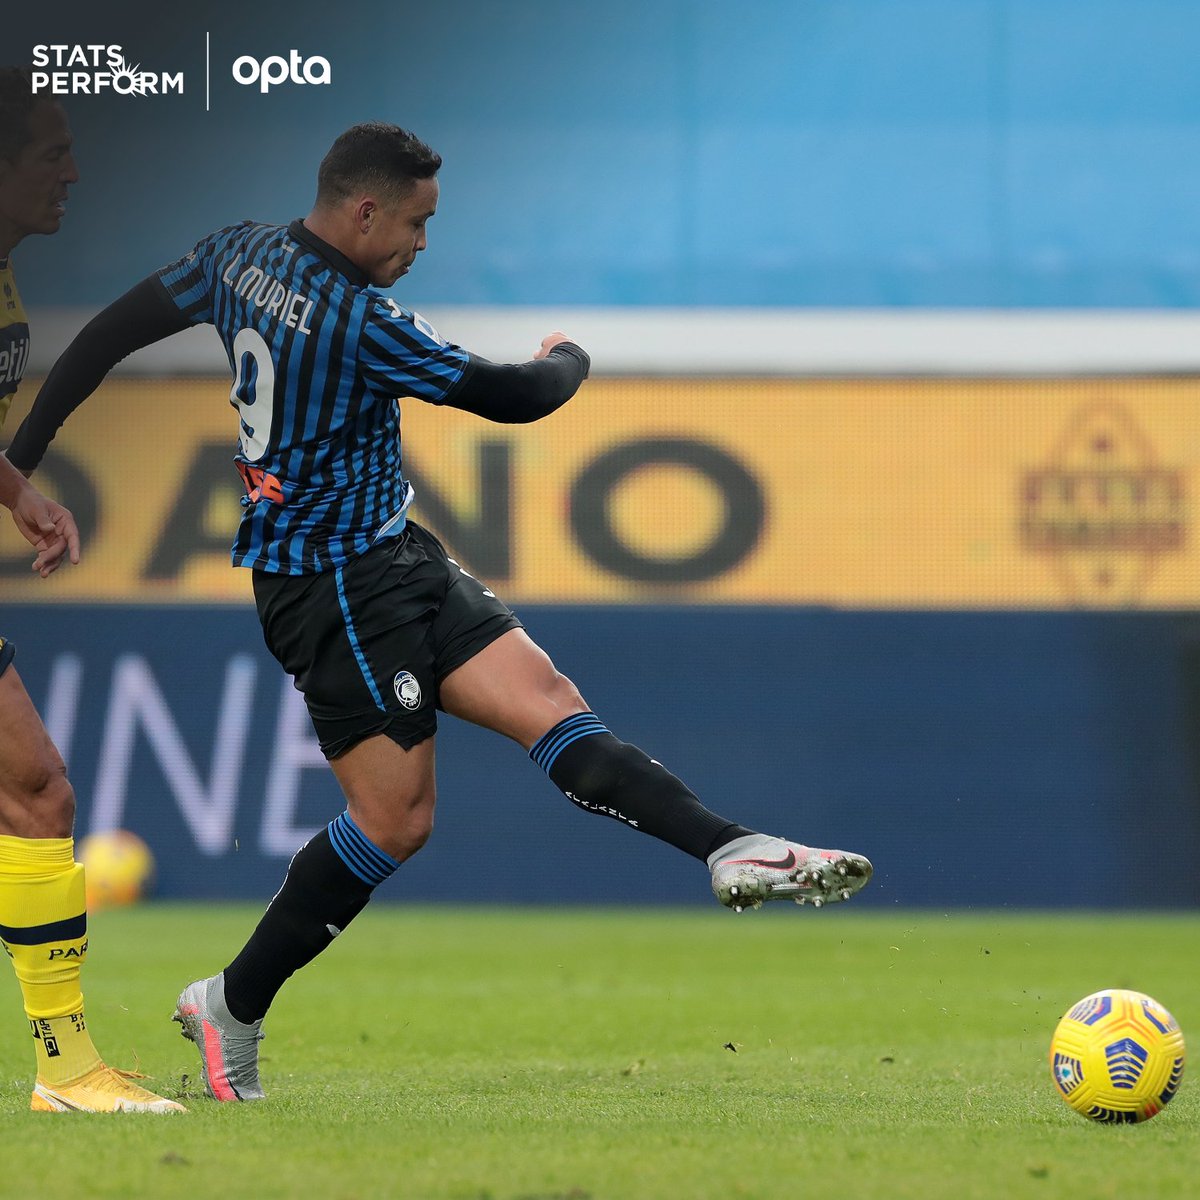 Optapaolo On Twitter 4 Luis Muriel Has Scored In Four Consecutive Appearances For The First Time In His Career In Serie A Astonishment Atalantaparma Https T Co Mghyqqjtkv